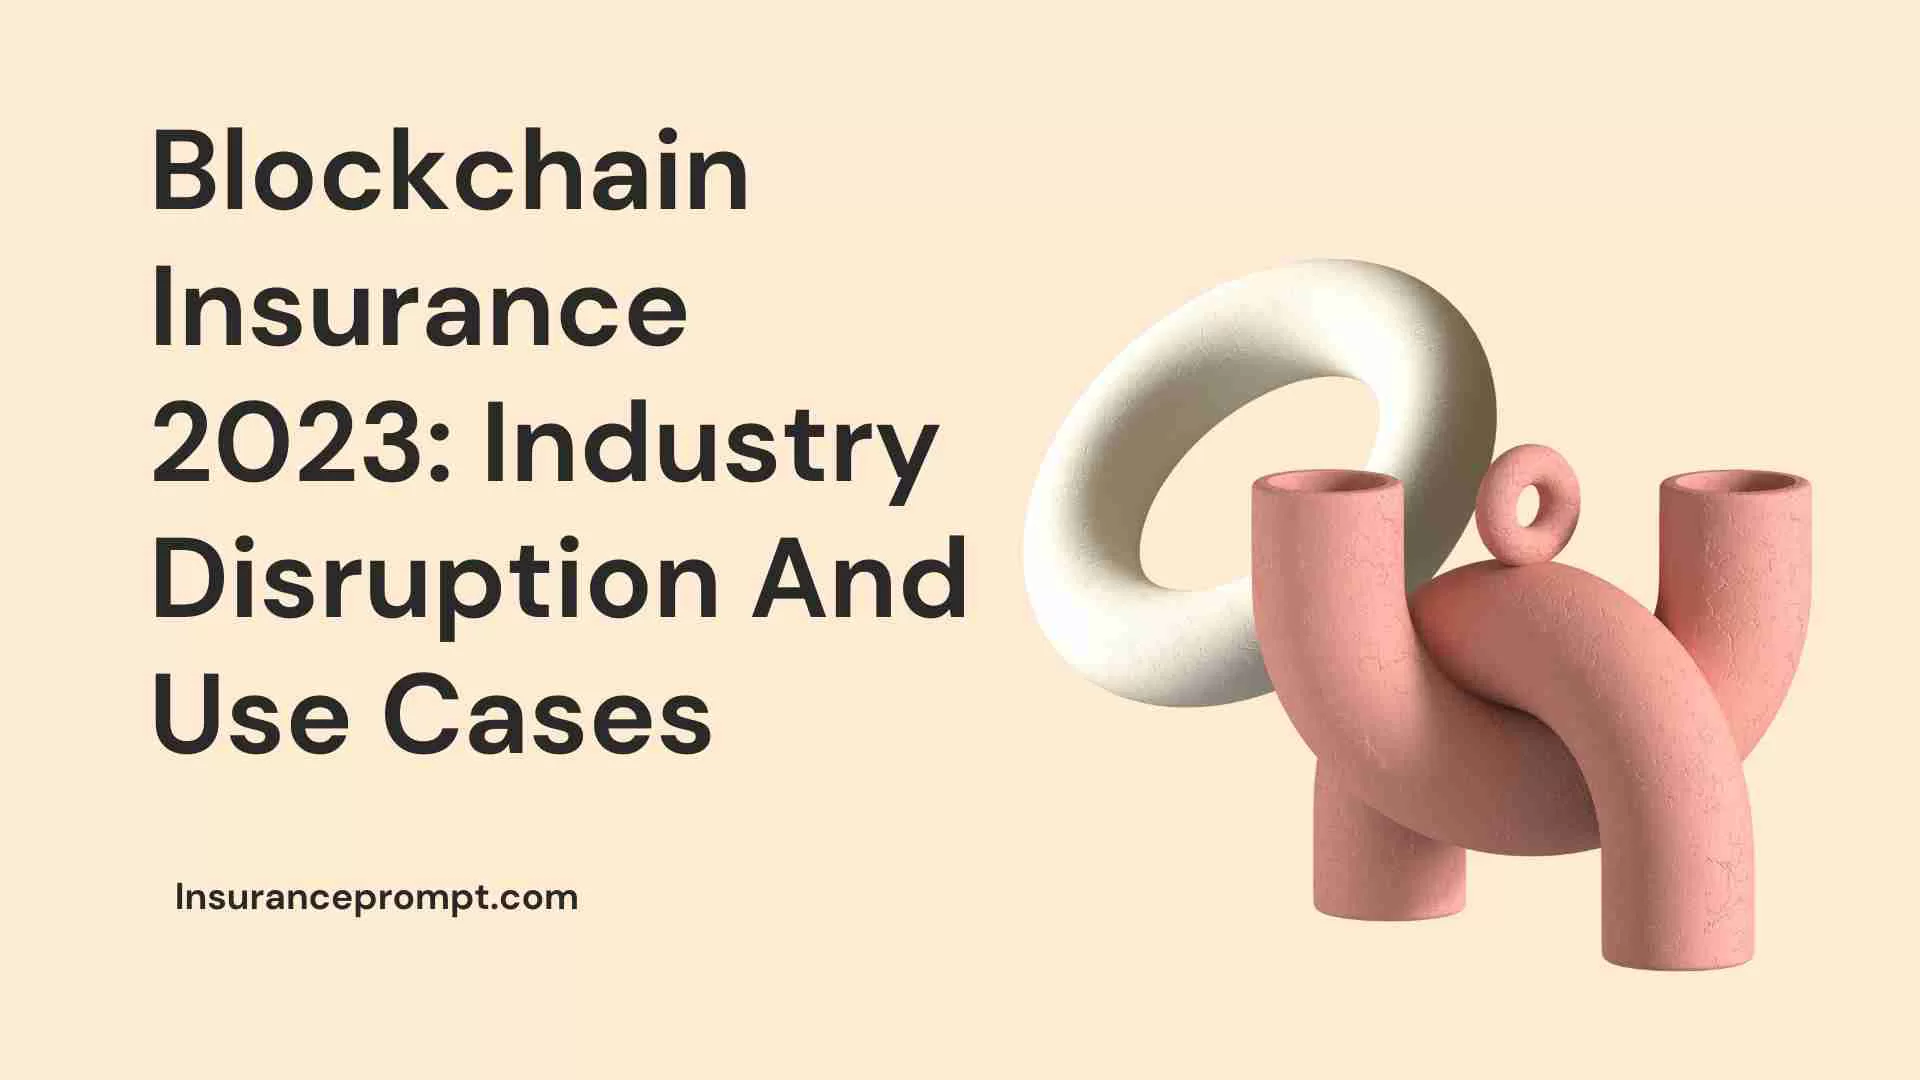 Blockchain Insurance 2023 Industry Disruption And Use Cases